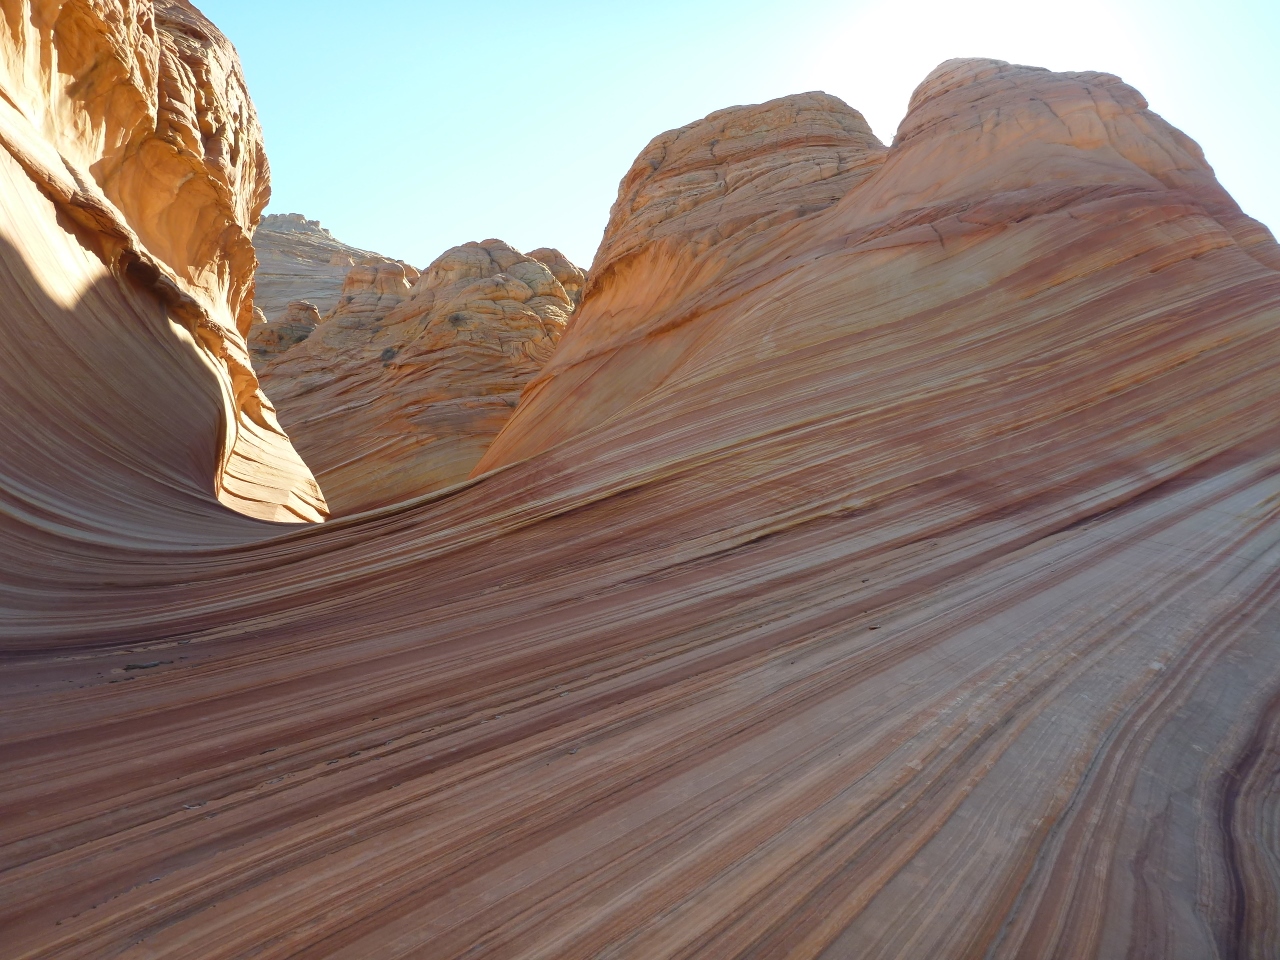 the wave coyote buttes north utah nov 2014